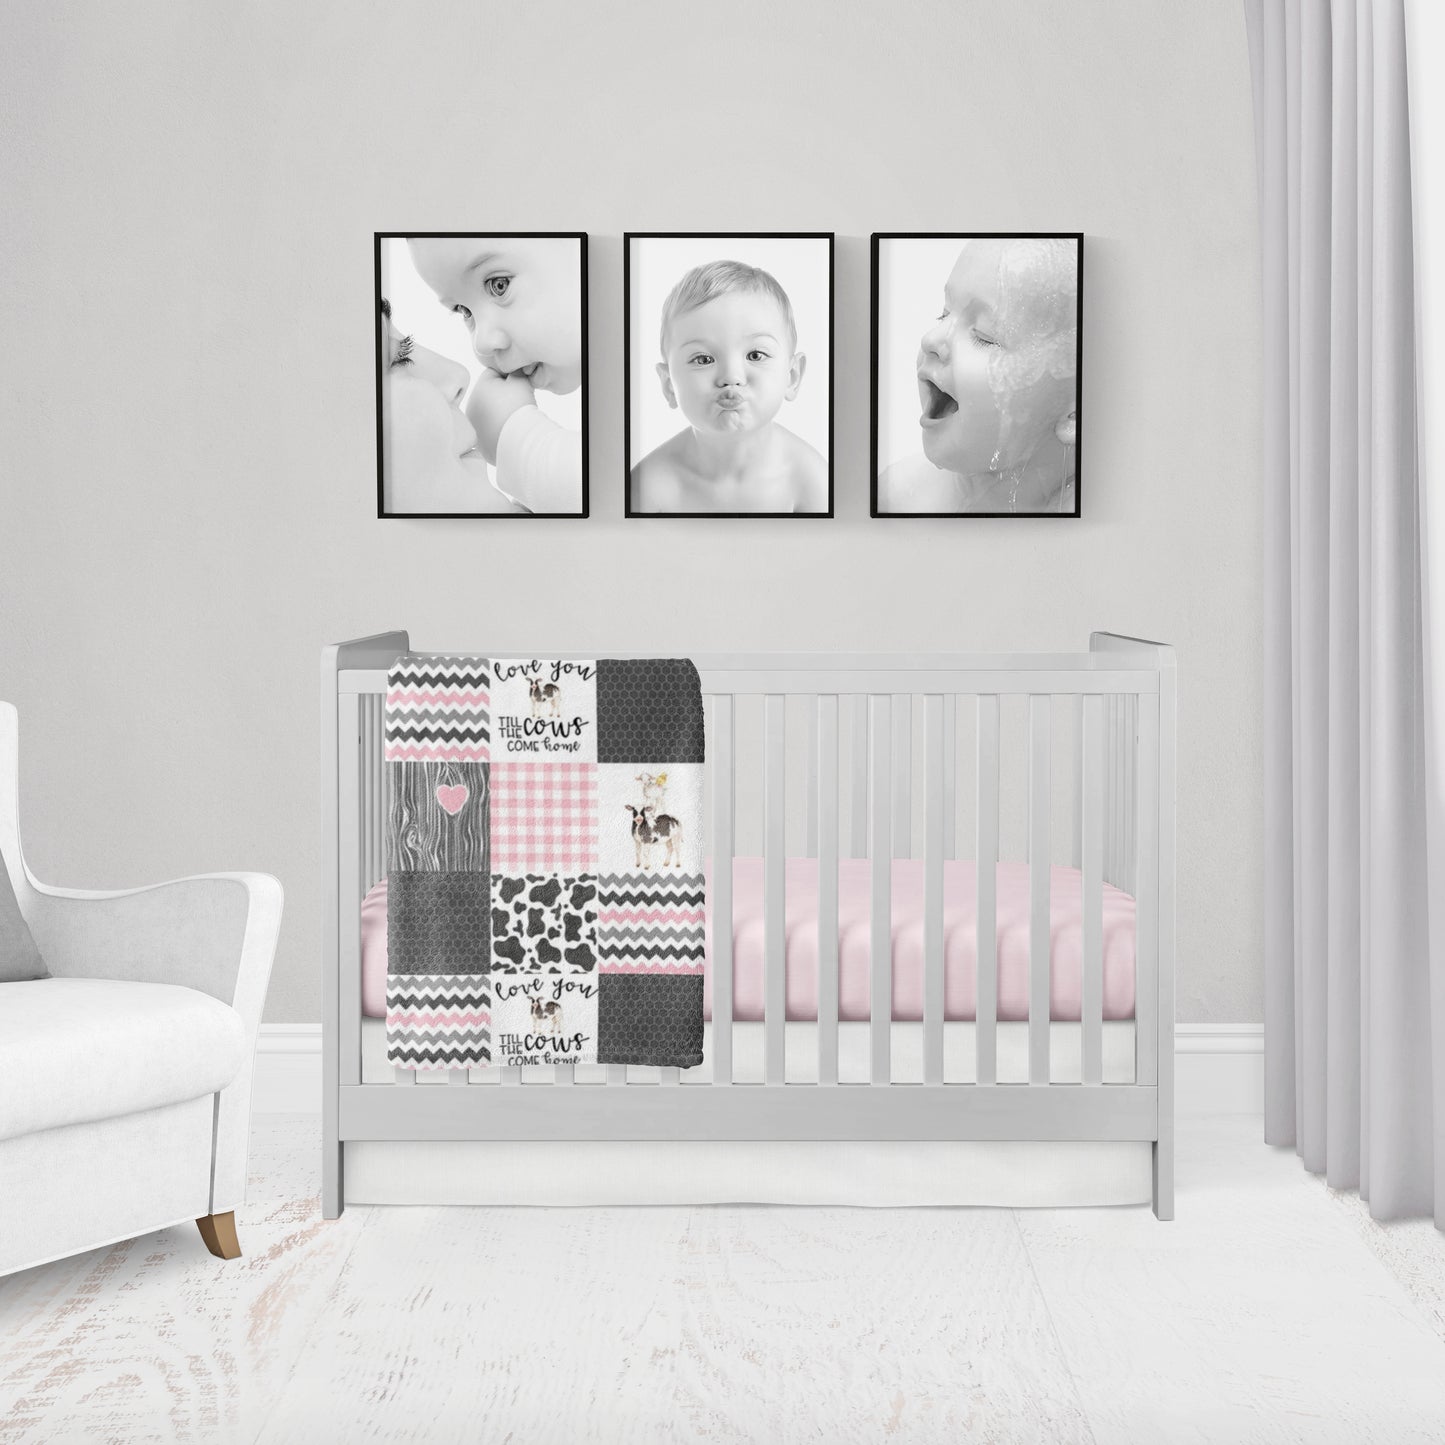 2-Piece set: light pink & gray cow minky or cotton blanket with light pink crib sheet.